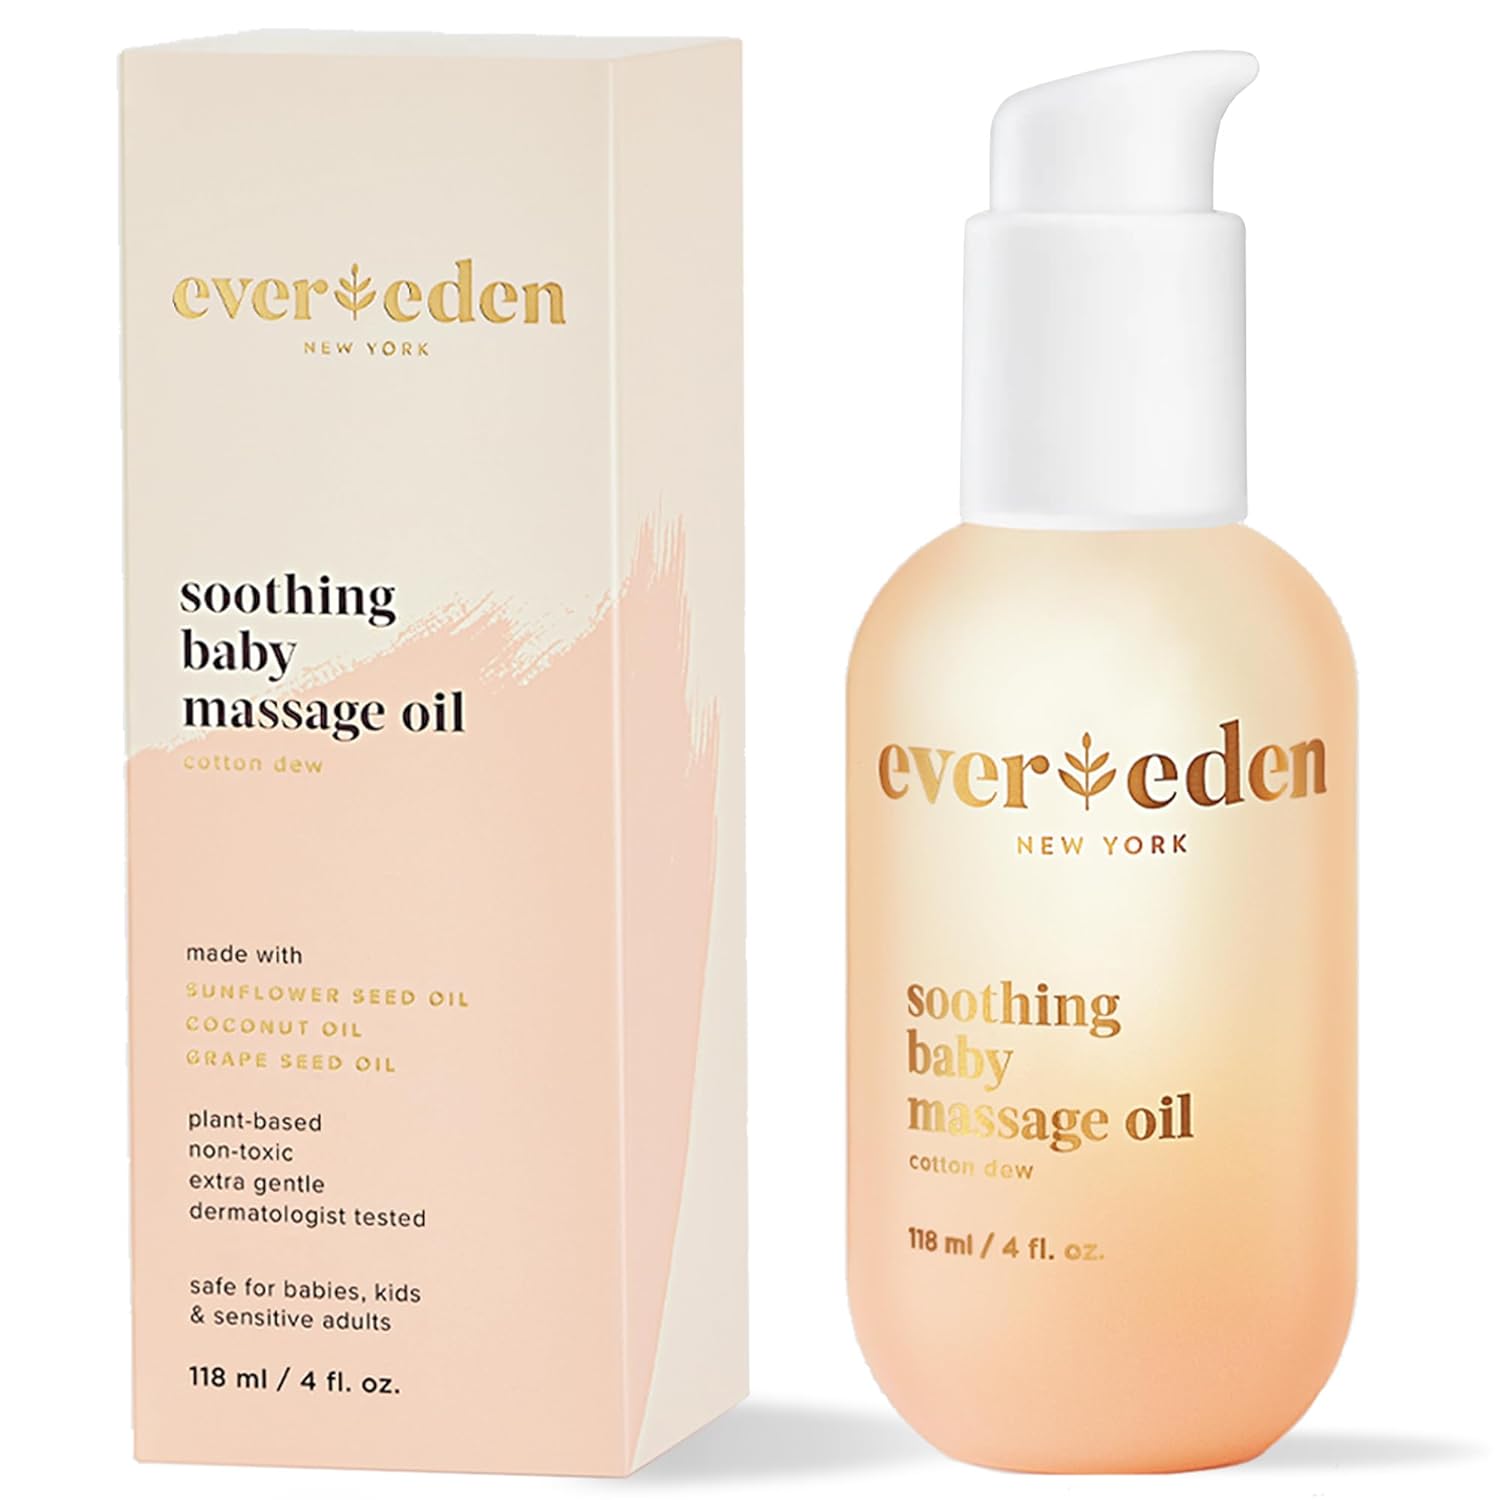 Evereden Soothing Baby Massage Oil: Cotton Dew 4 fl oz. | Non-toxic and Clean Baby Care | Plant-based and Organic Ingredients | All Natural Fragrance